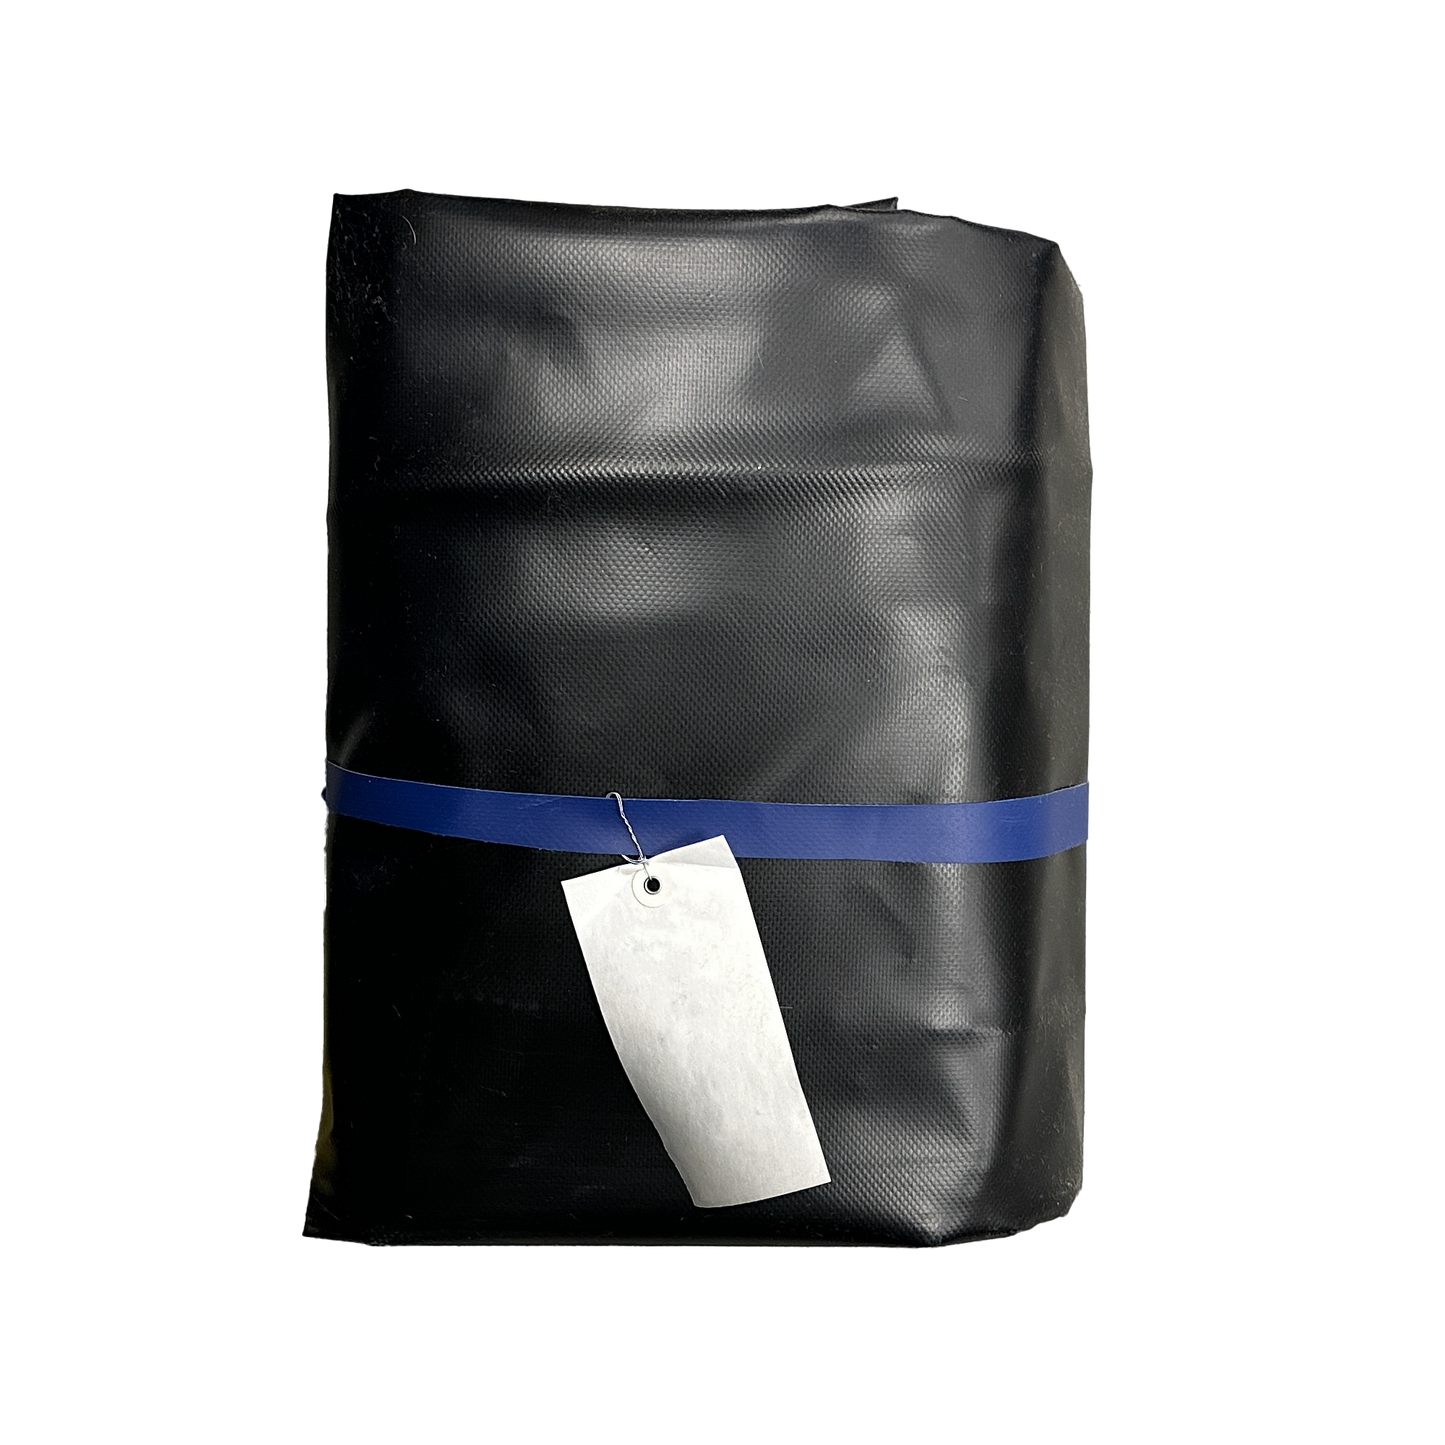 7' X 18' 22oz Vinyl Tarp For Arm System With Tubing And Grommets In The Front, Reinforced Pocket On Rear